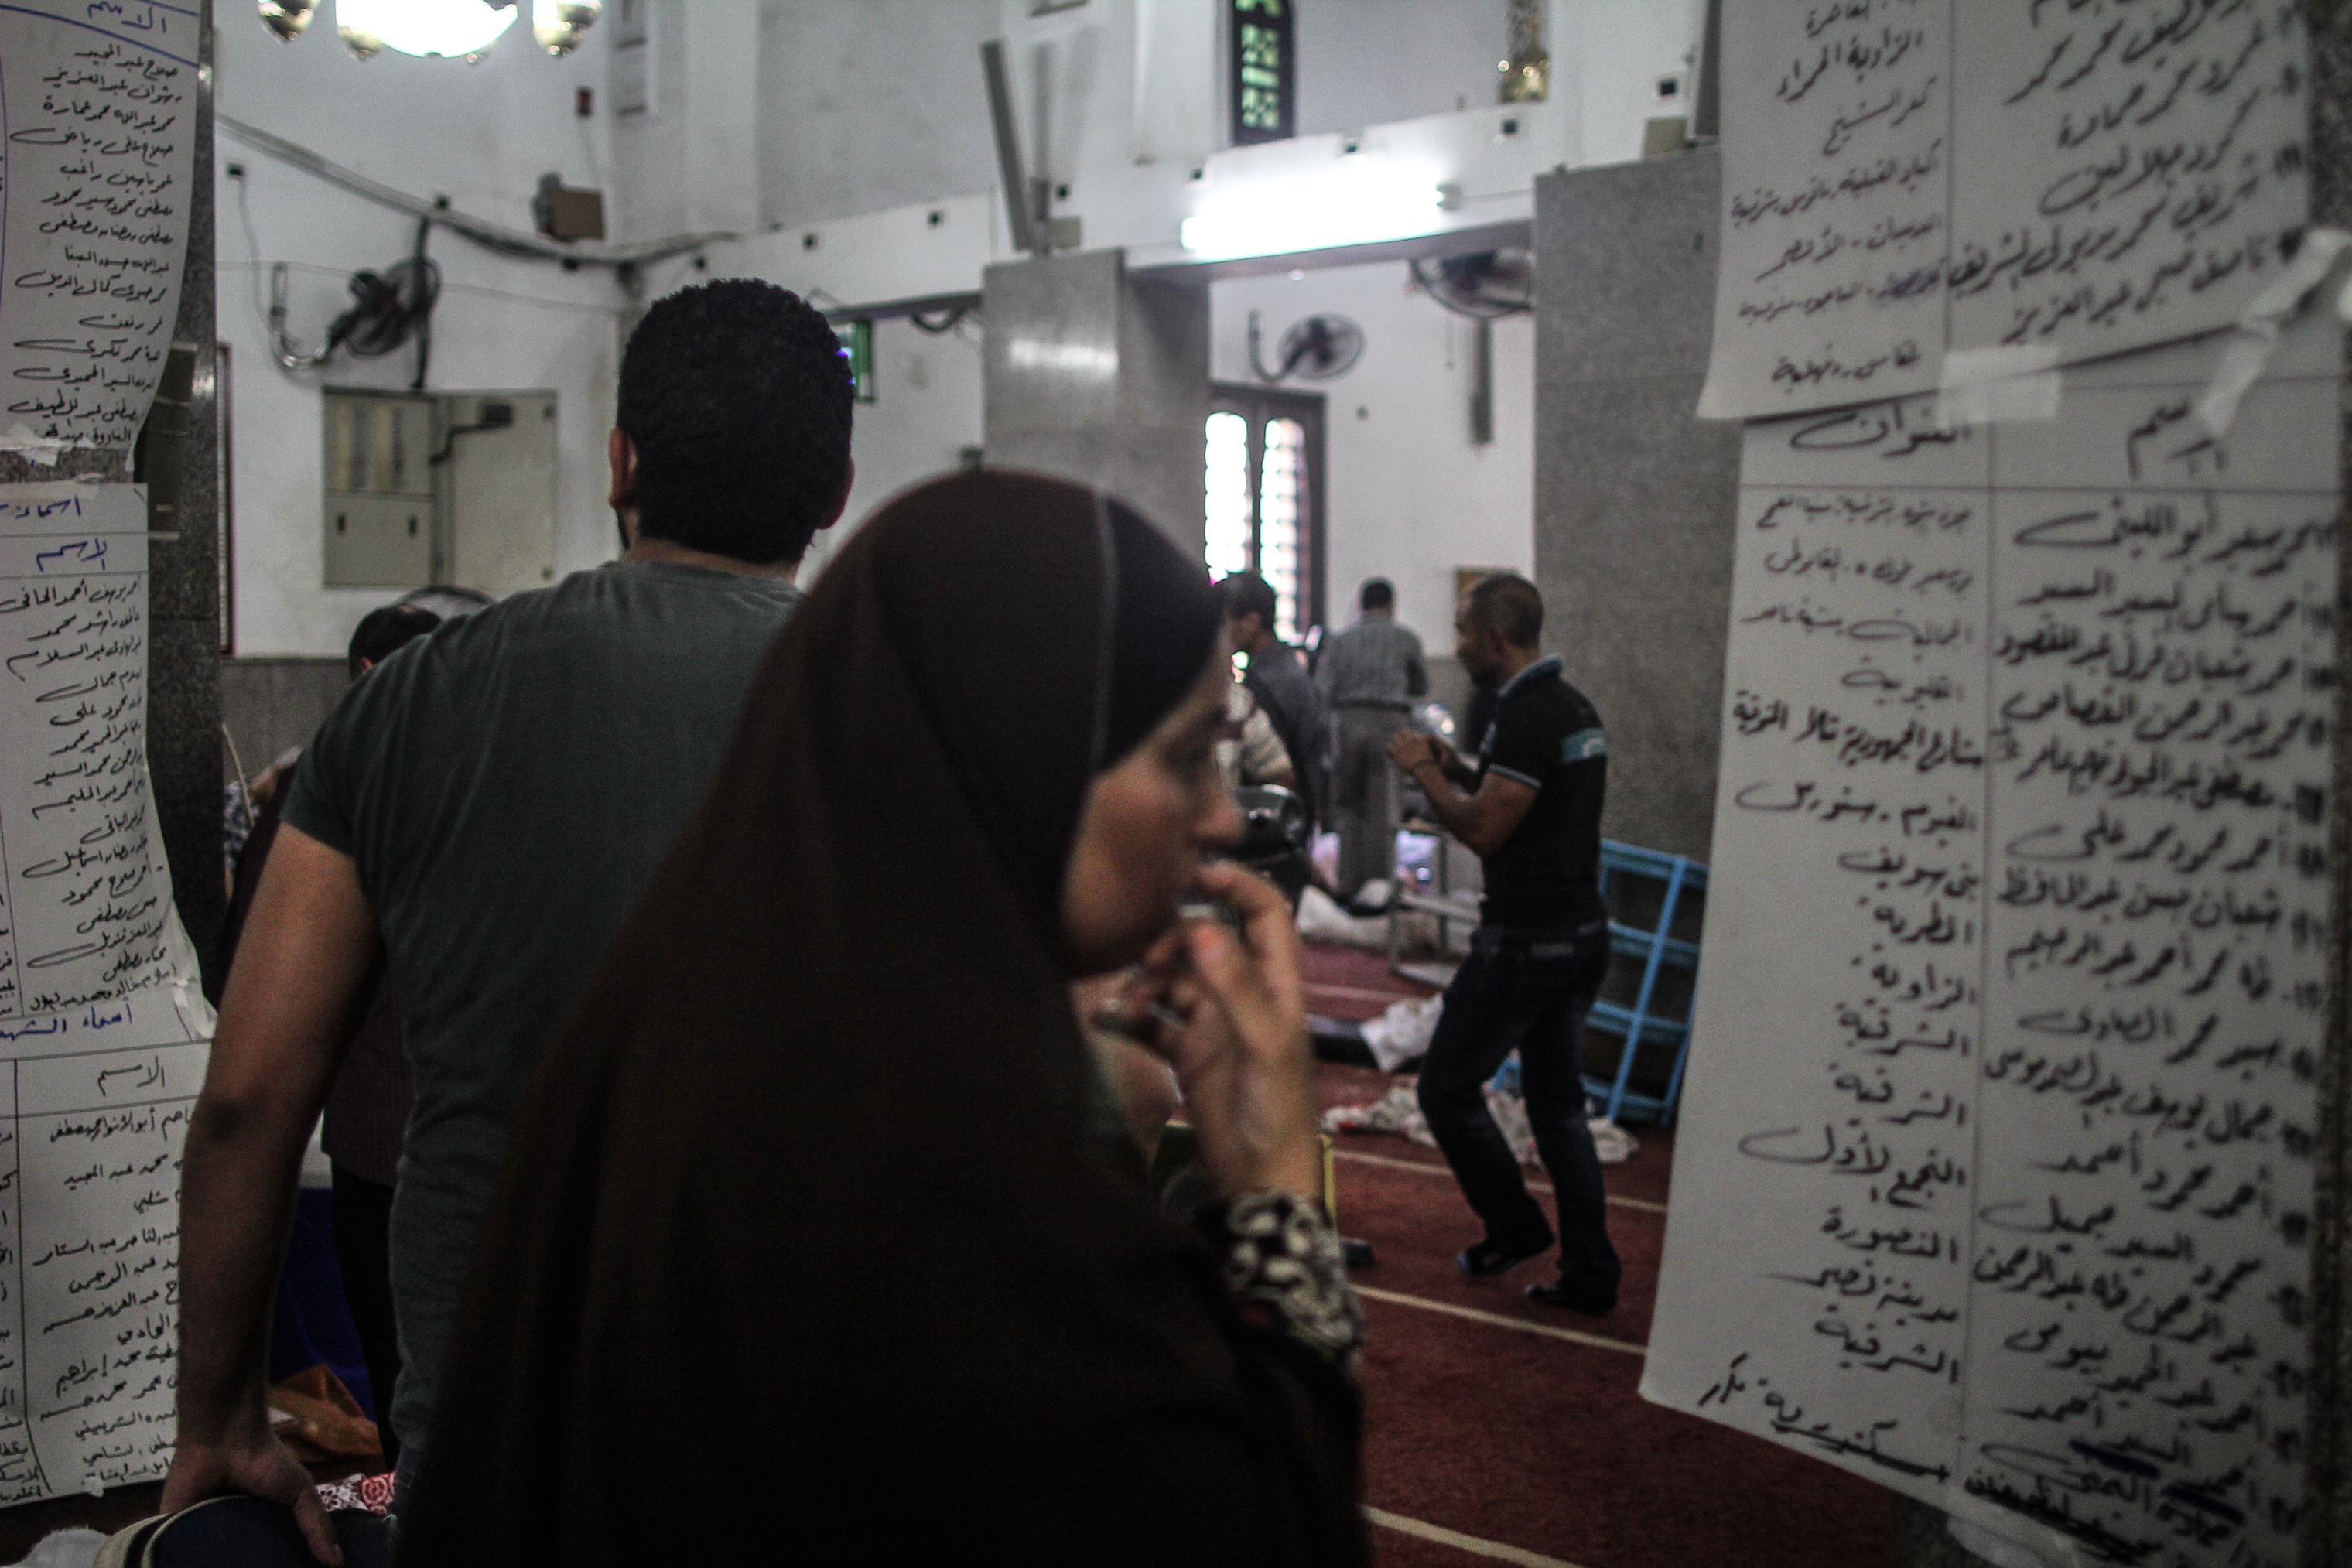 The next day, at a mosque where the bodies were transferred, a distraught mother searches for her son's name on a list showing who had been killed. (Mosa’ab Elshamy)